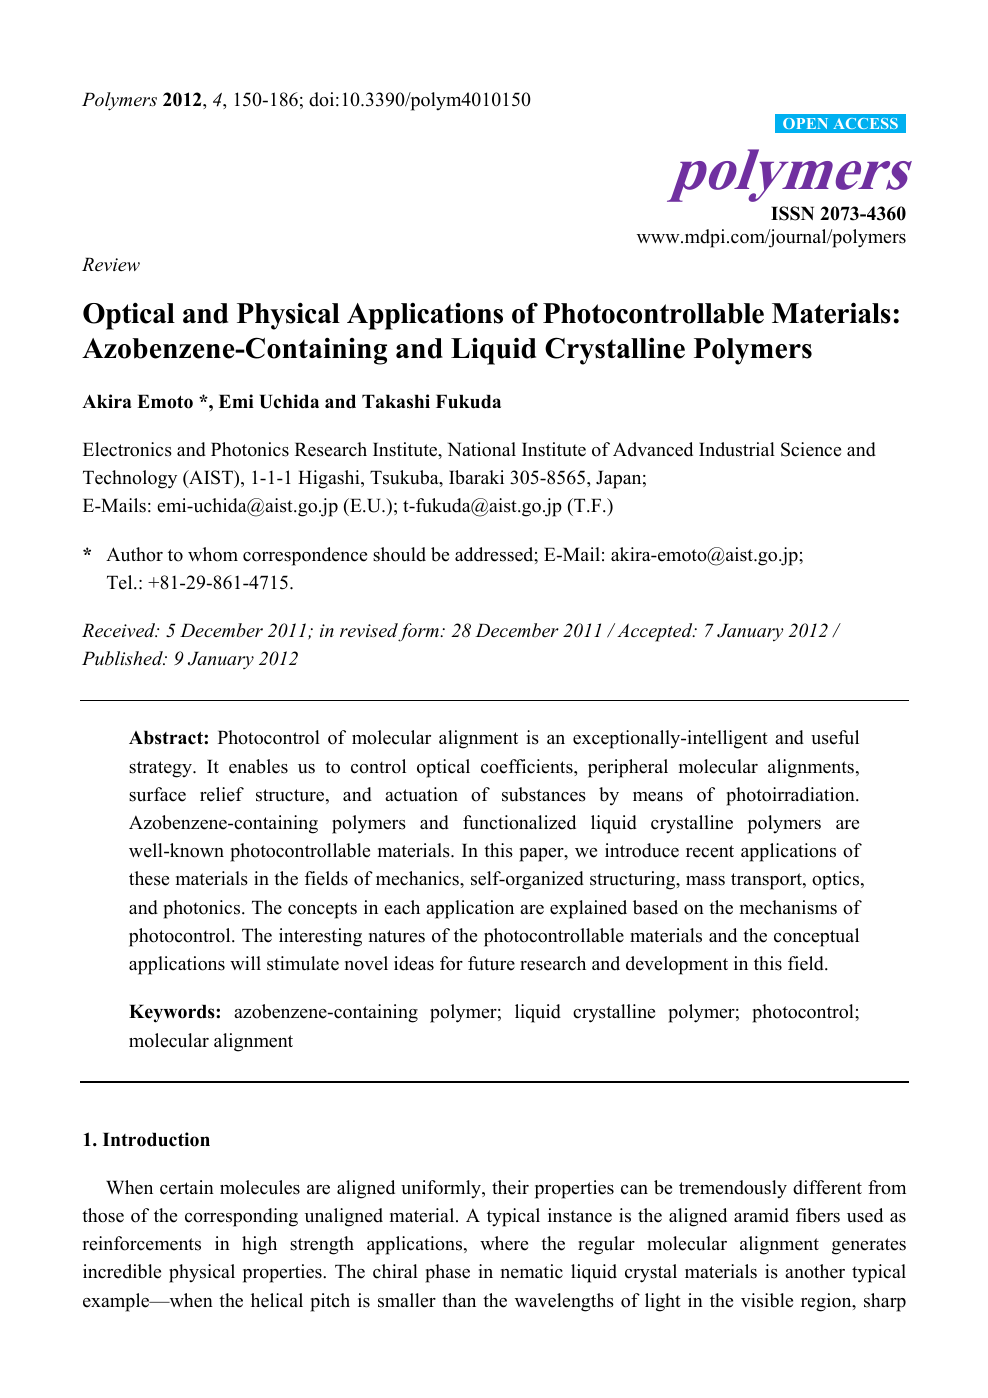 Optical and Physical Applications of Photocontrollable Materials 